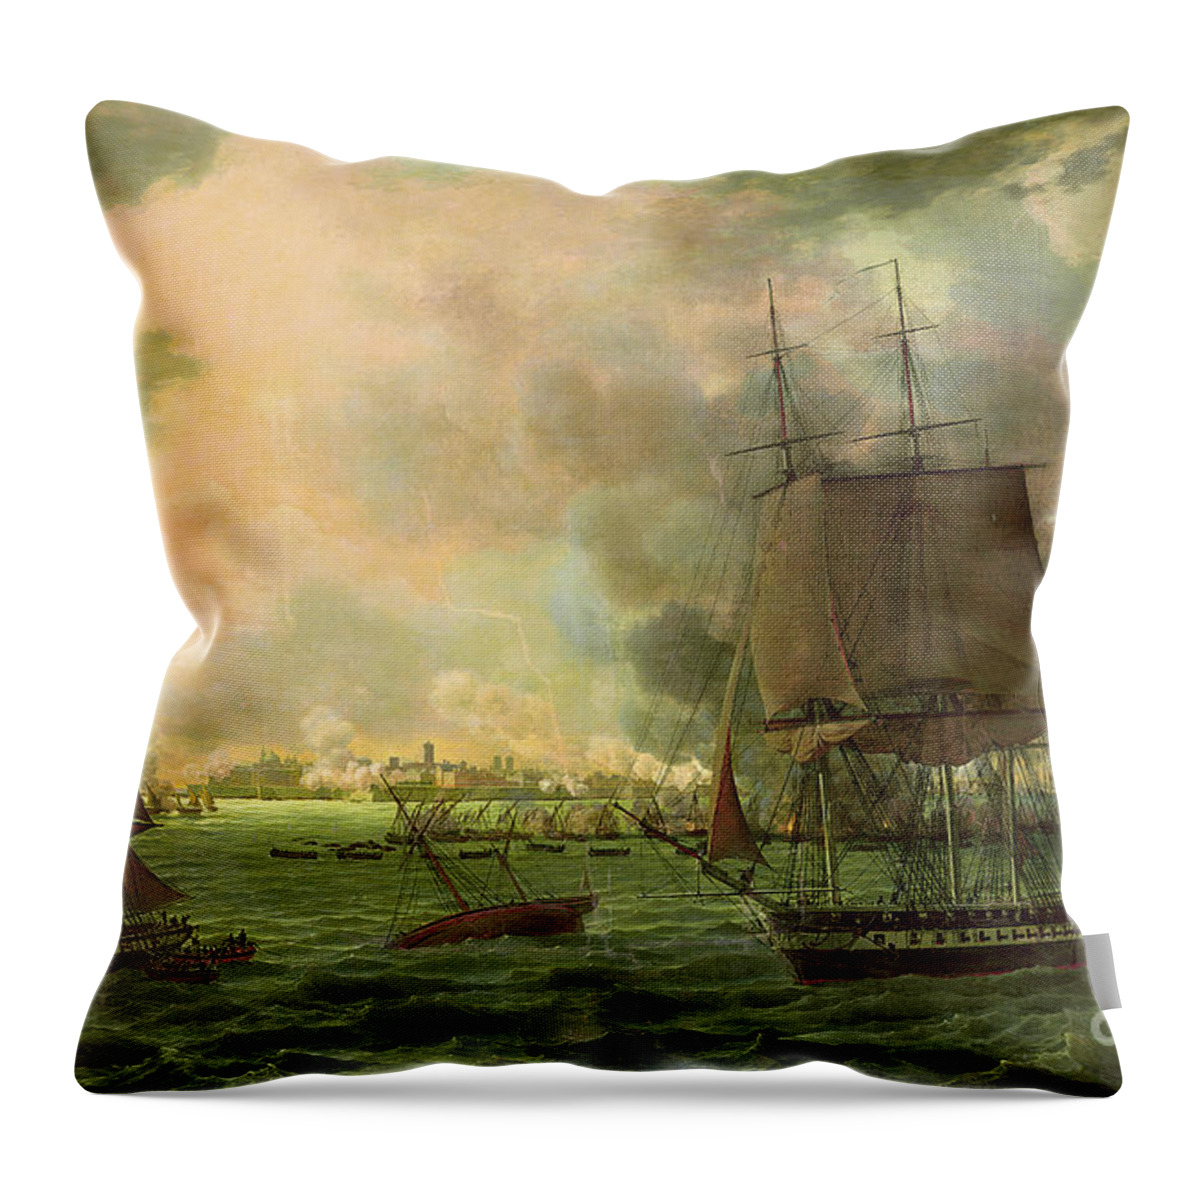 The Throw Pillow featuring the painting The Bombing of Cadiz by the French by Louis Philippe Crepin